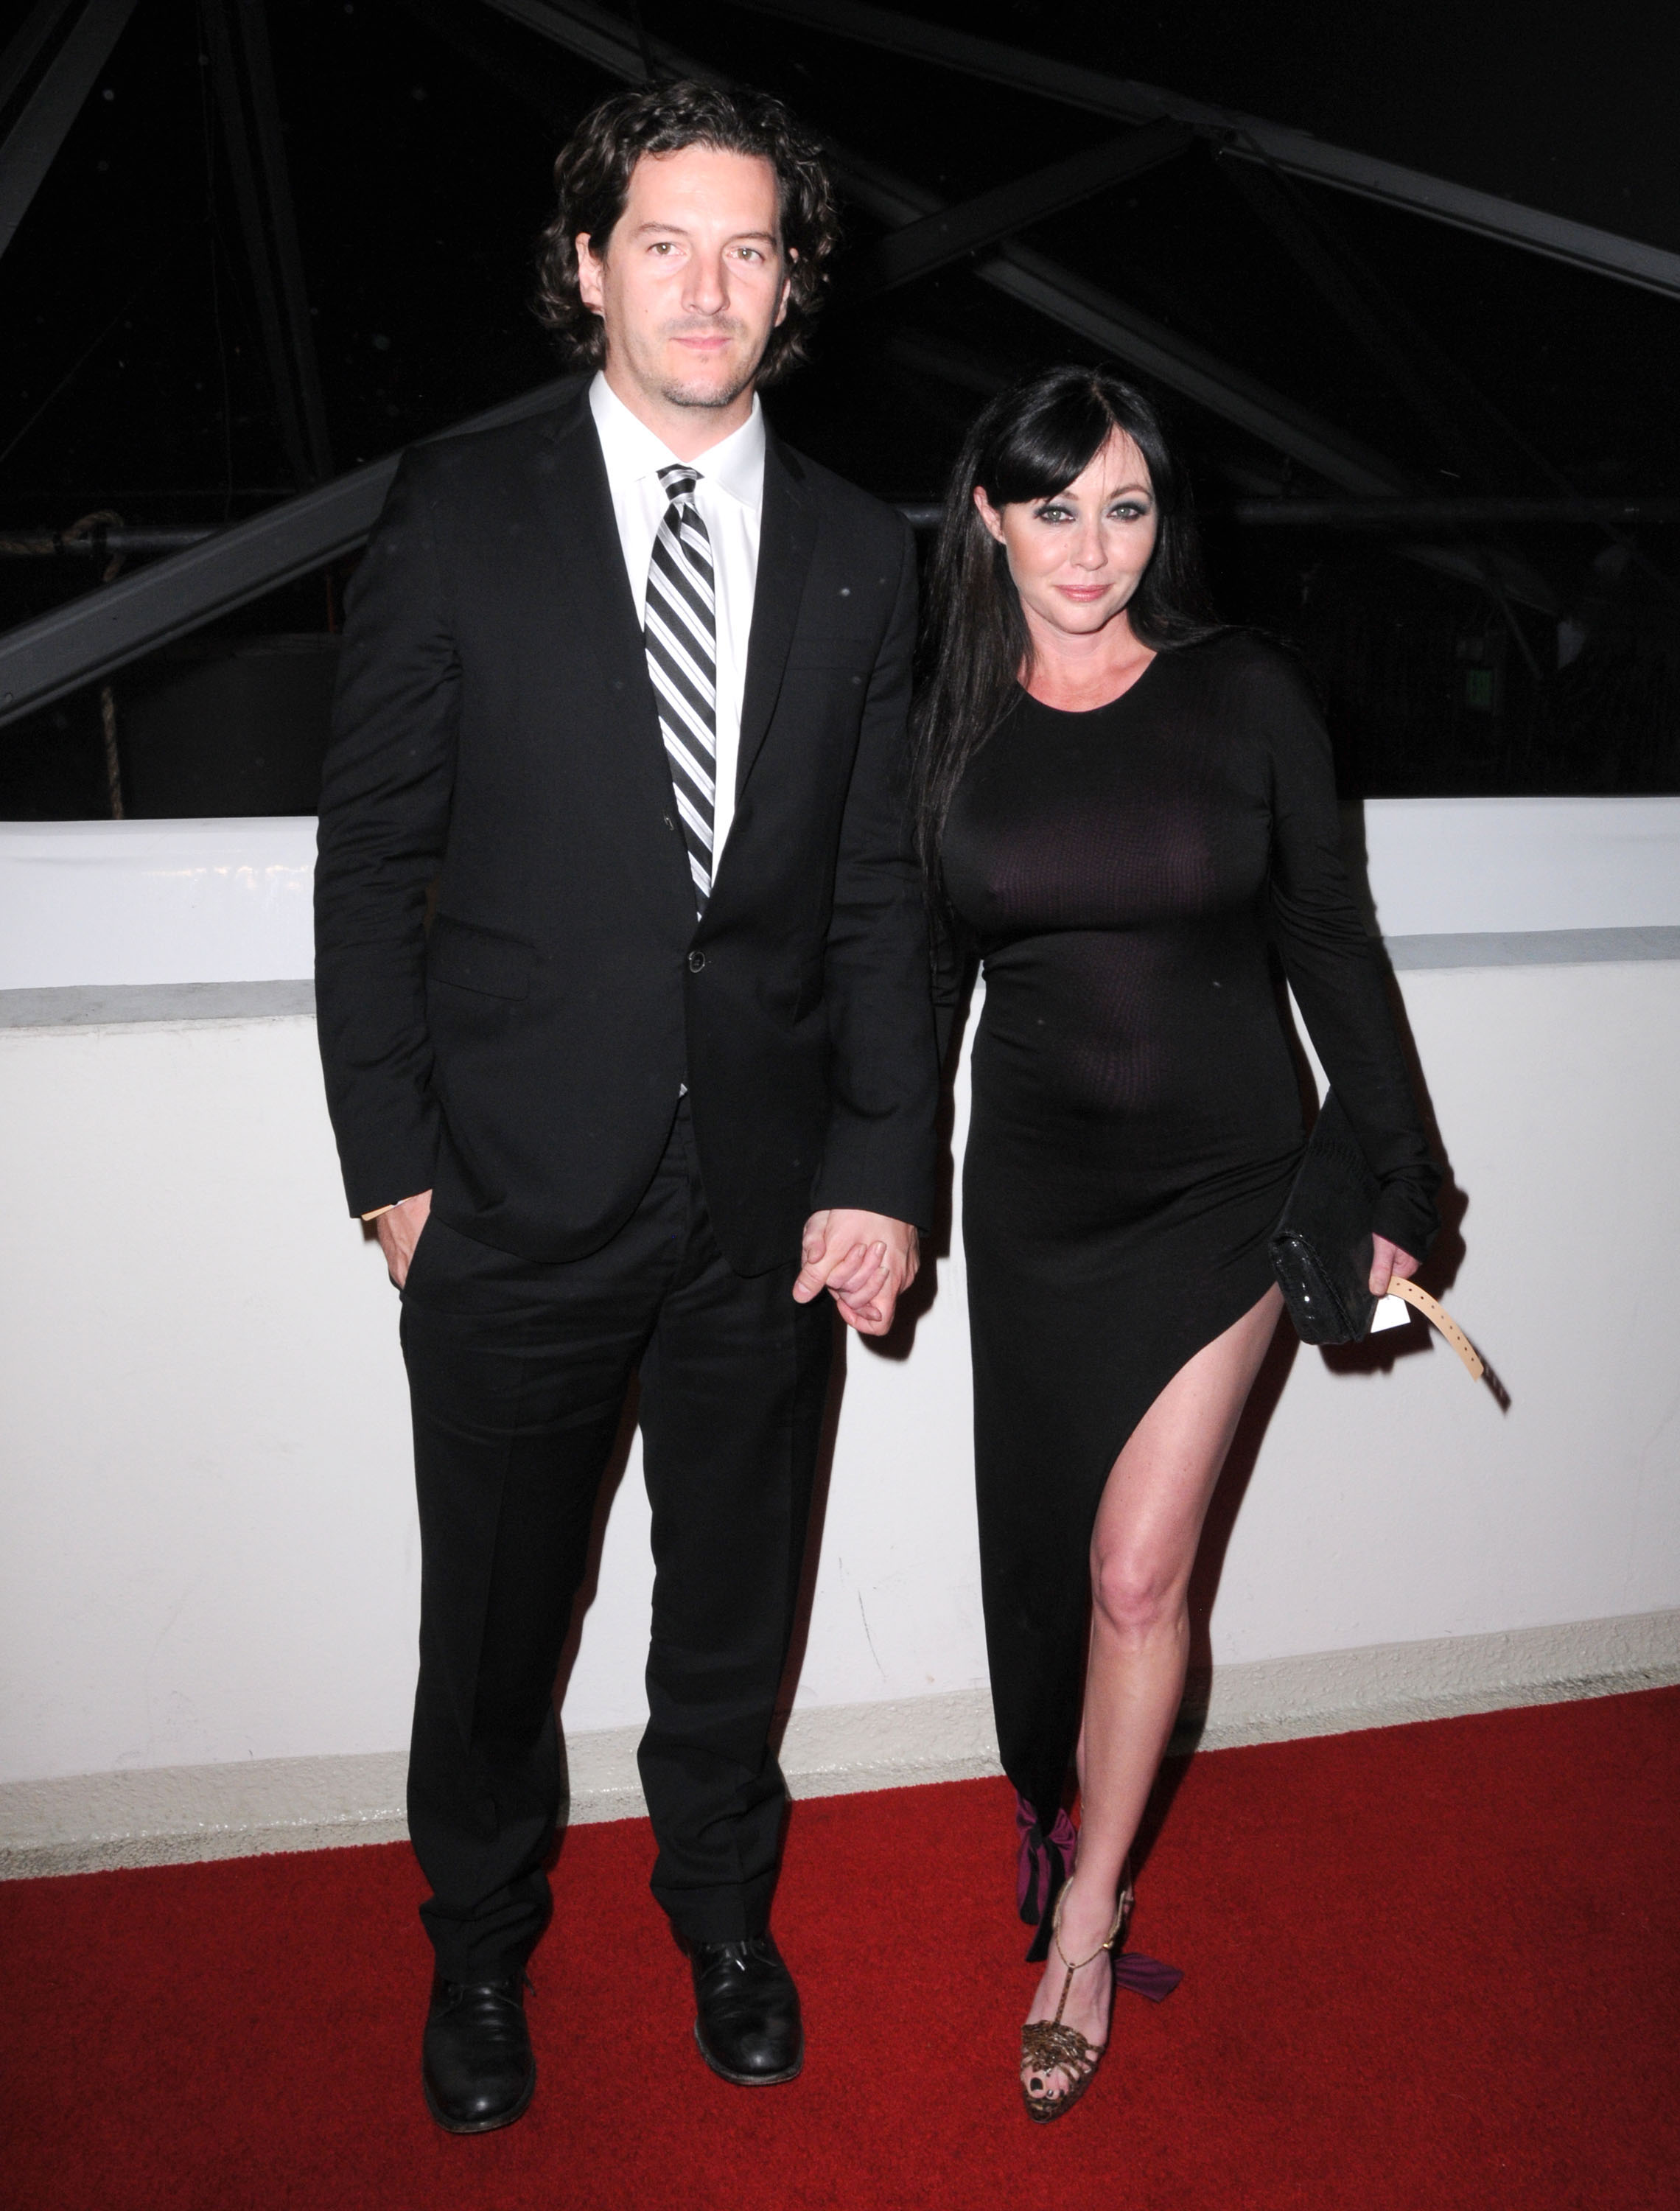 Kurt Iswarienko and Shannen Doherty arrive at The Weinstein Company and Realativity Media's Golden Globes after party held at Bar 210 inside The Beverly Hilton hotel in Beverly Hills, California on January 16, 2011. | Source: Getty Images